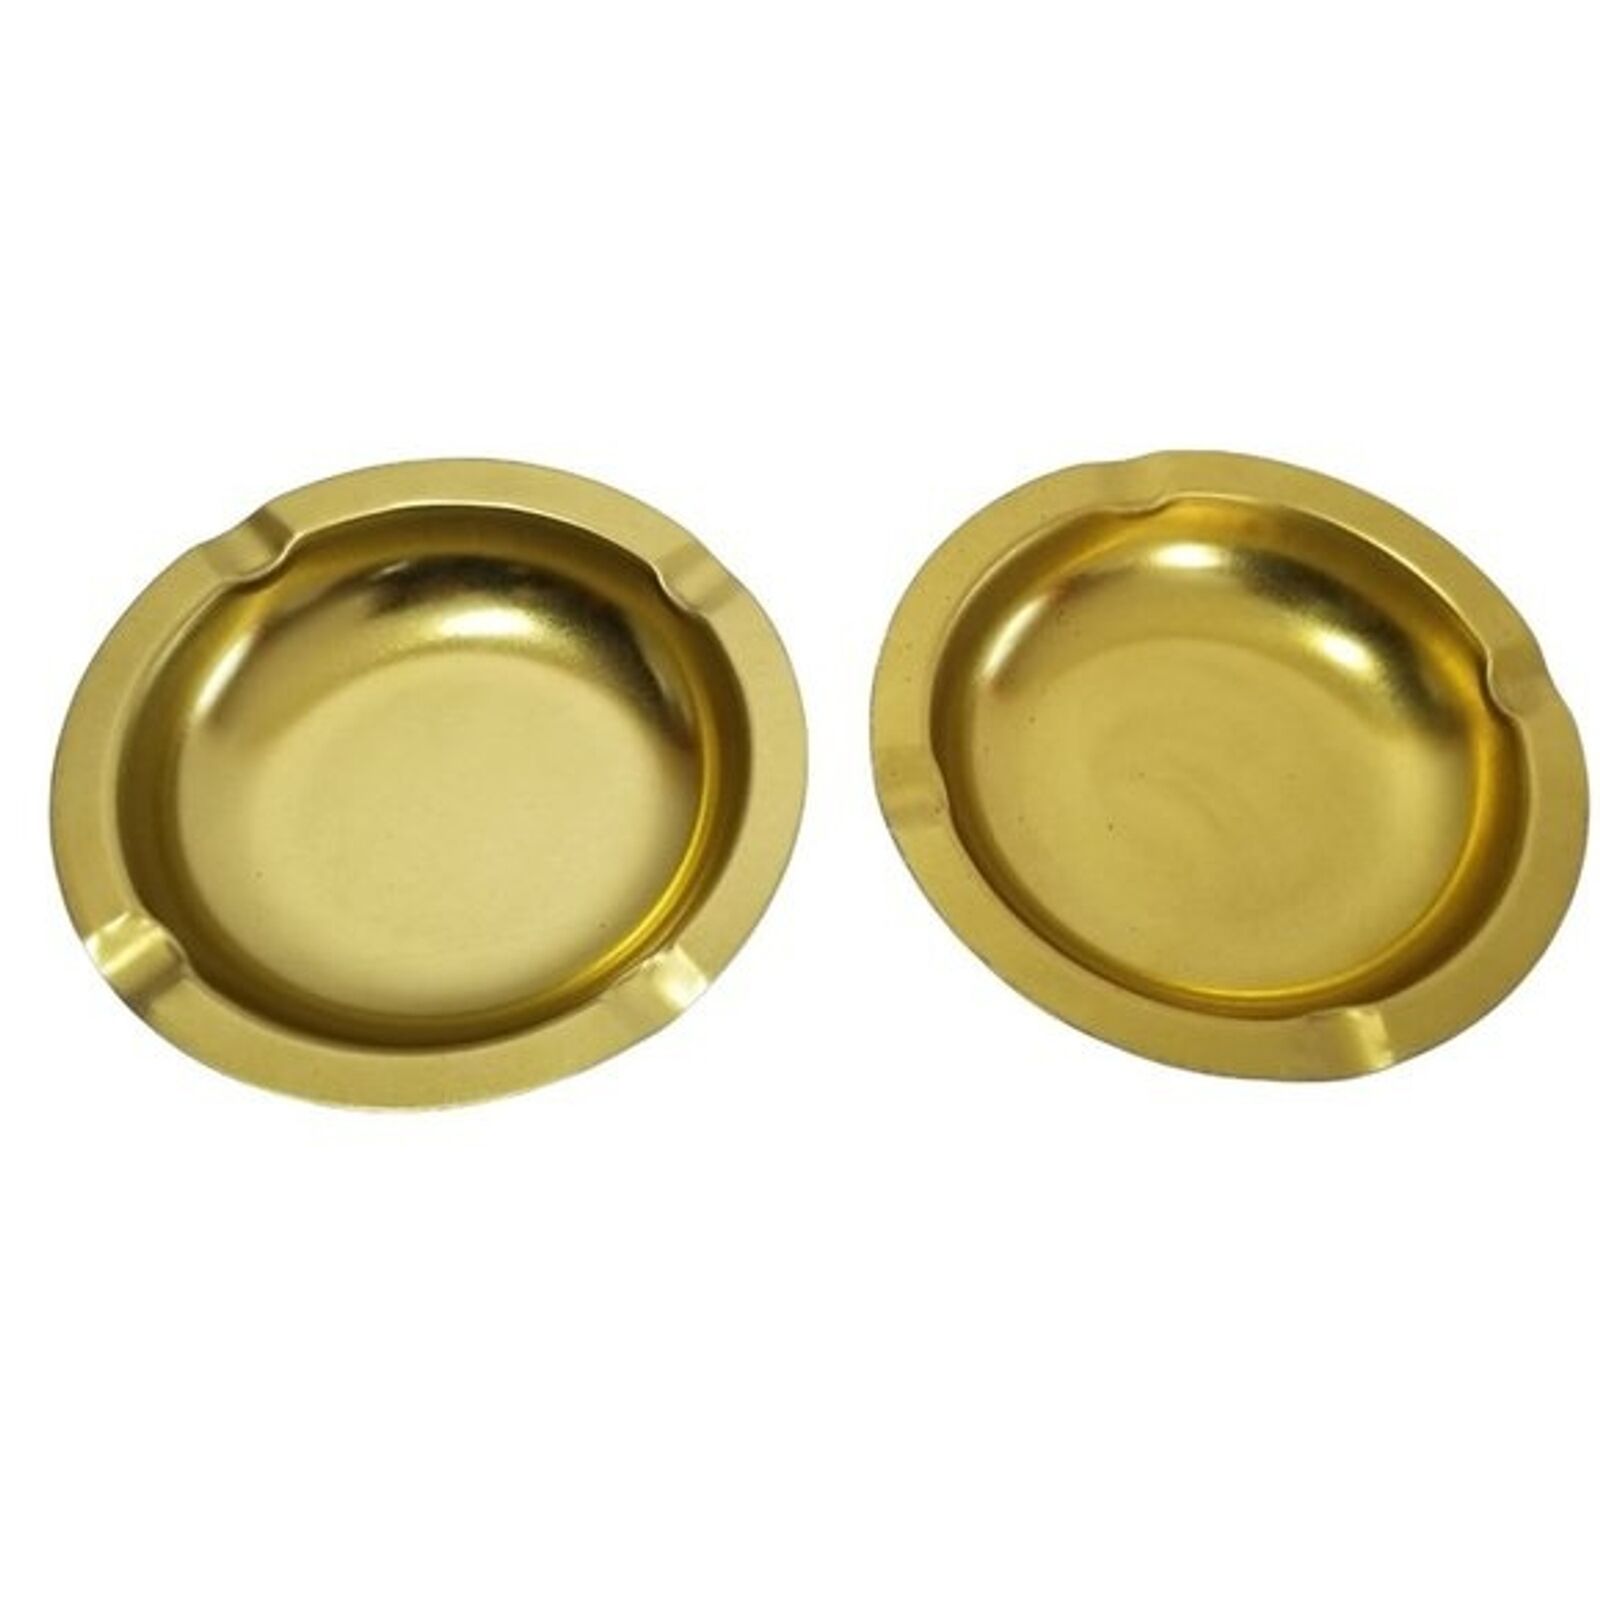 Tablecraft Products Gold Metal Ashtray Lot Set of 2 - NEW